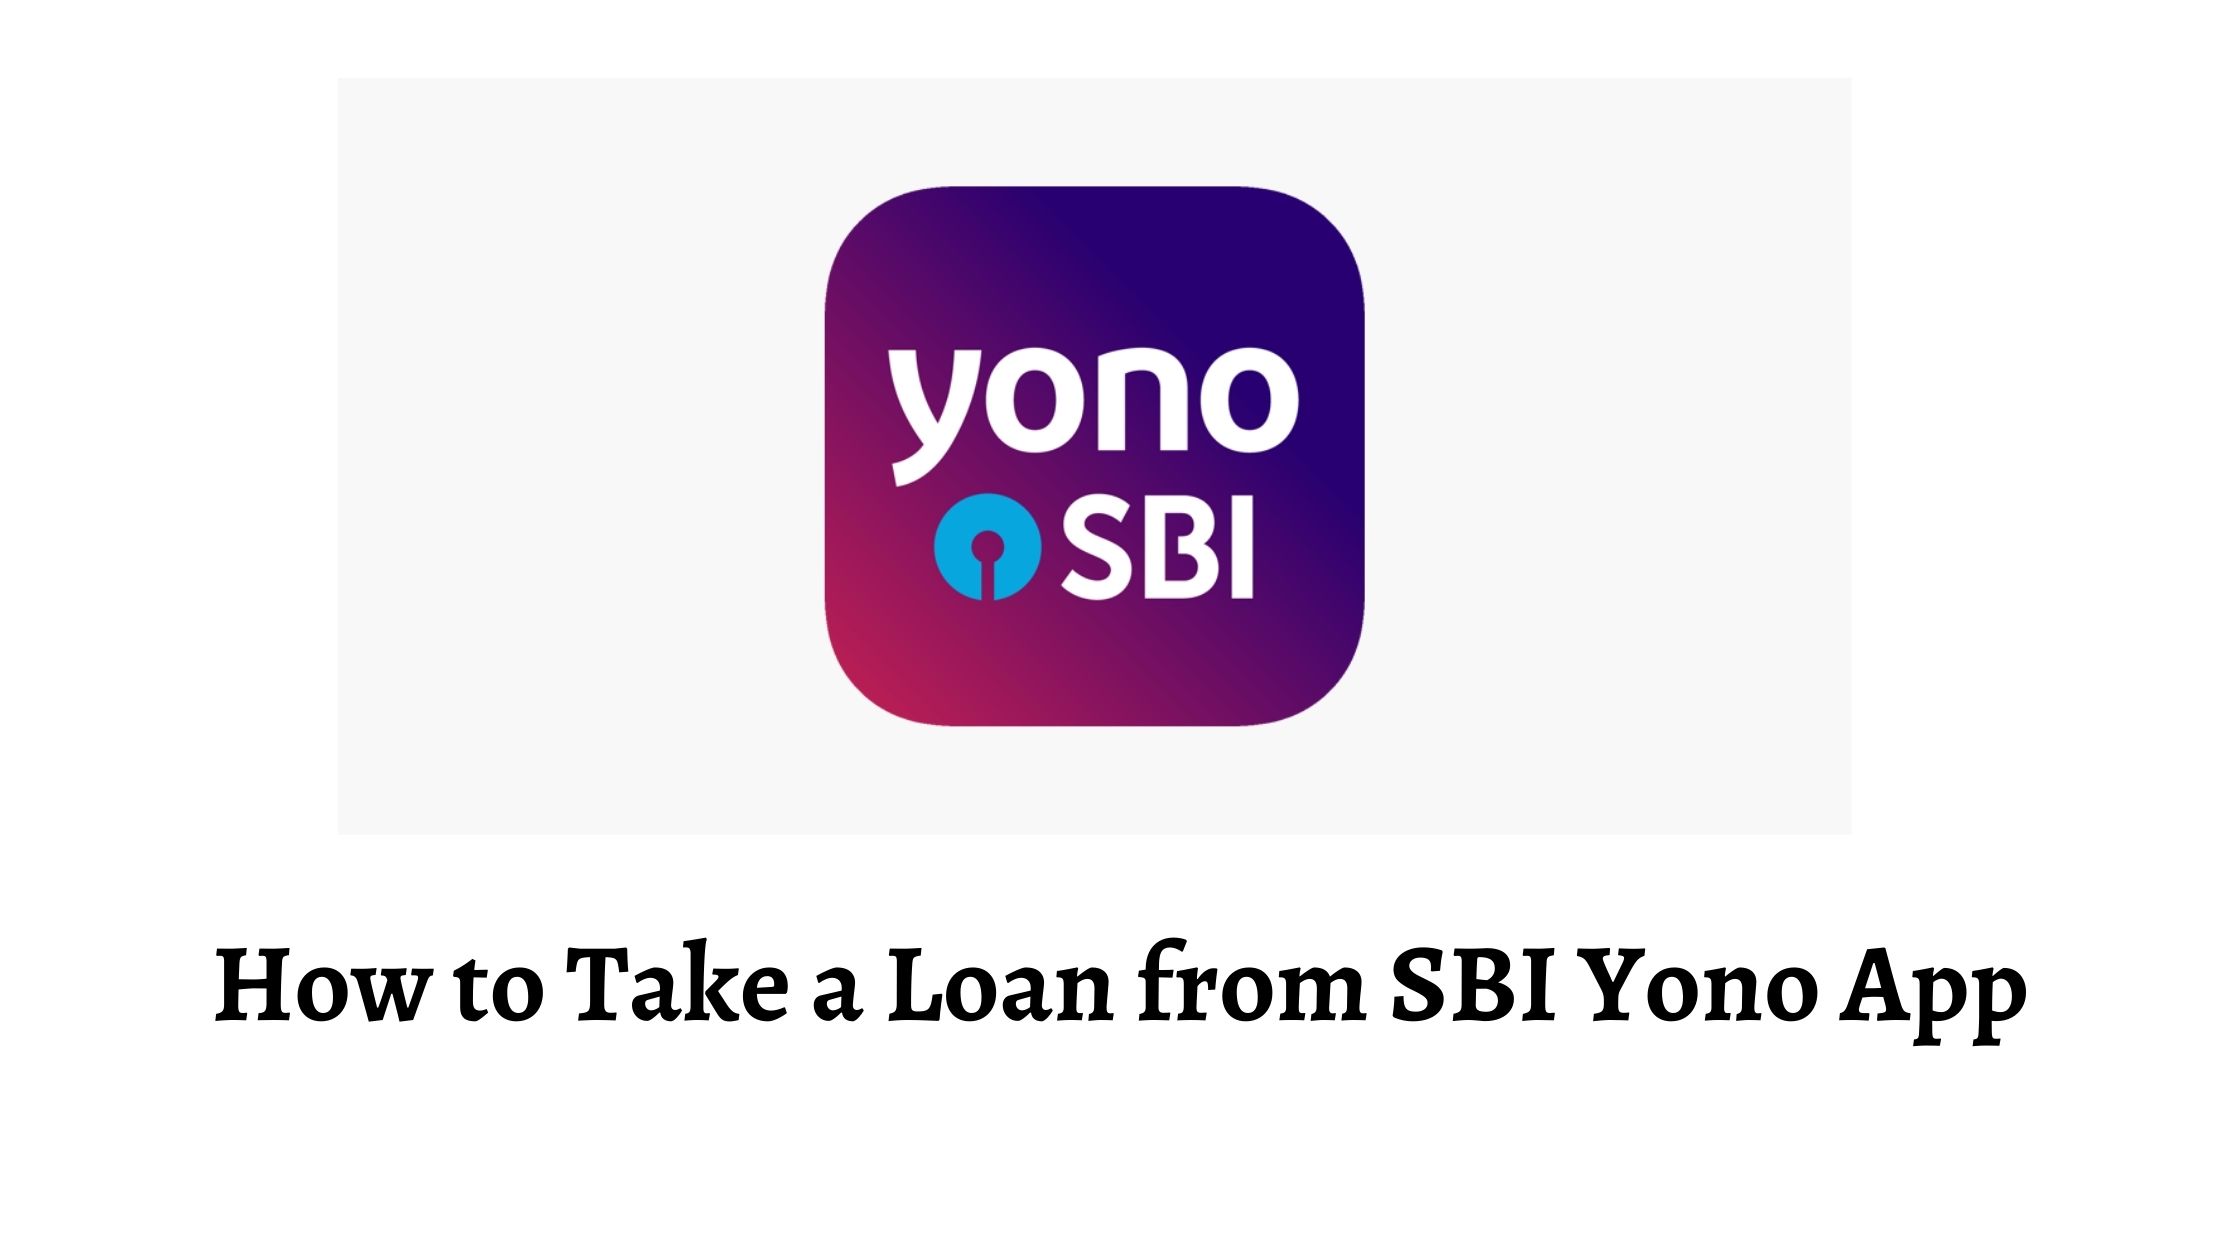 How to Take a Loan from SBI Yono App